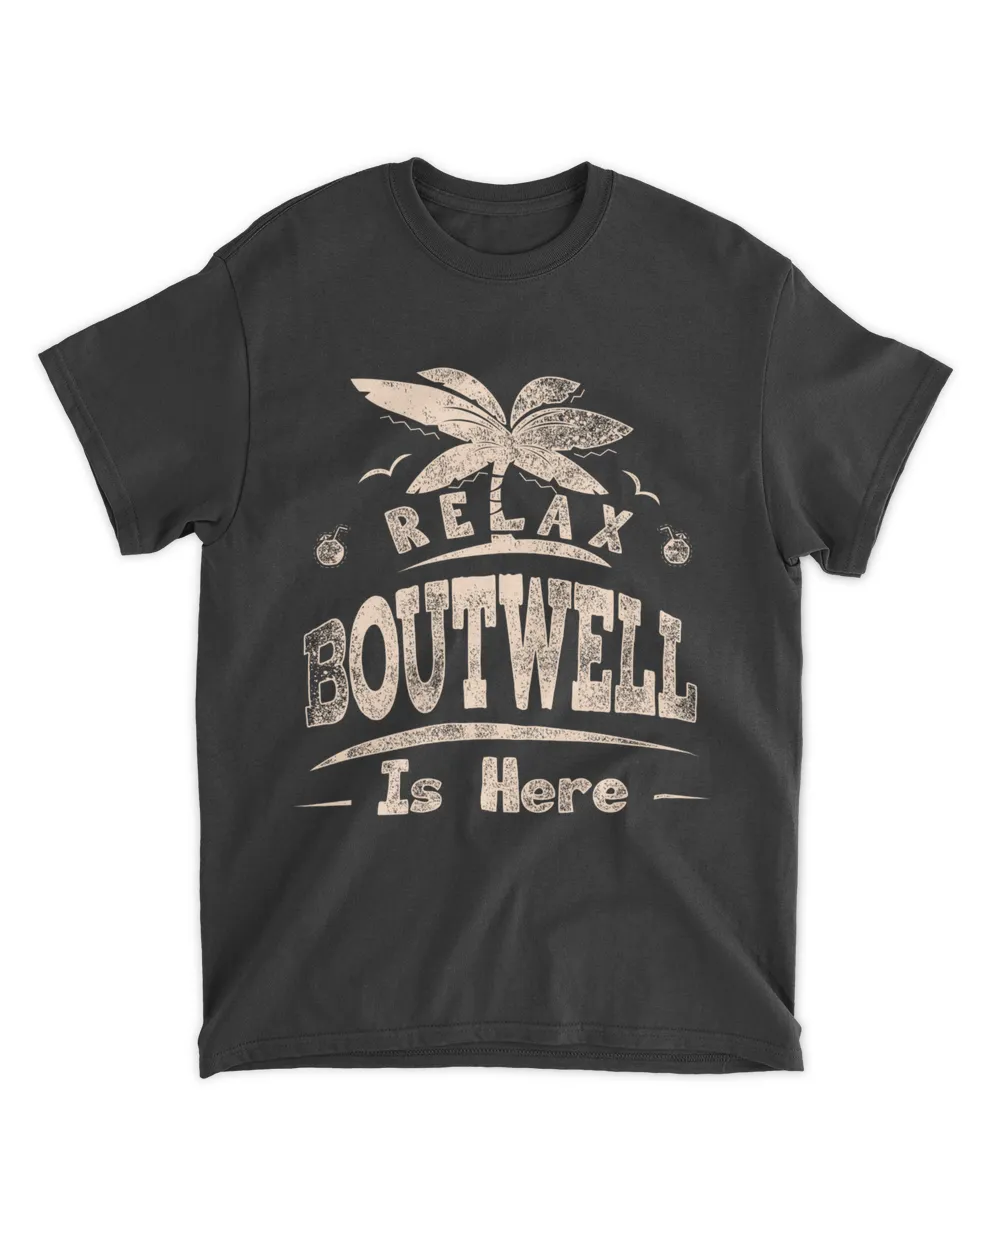 BOUTWELL HERE